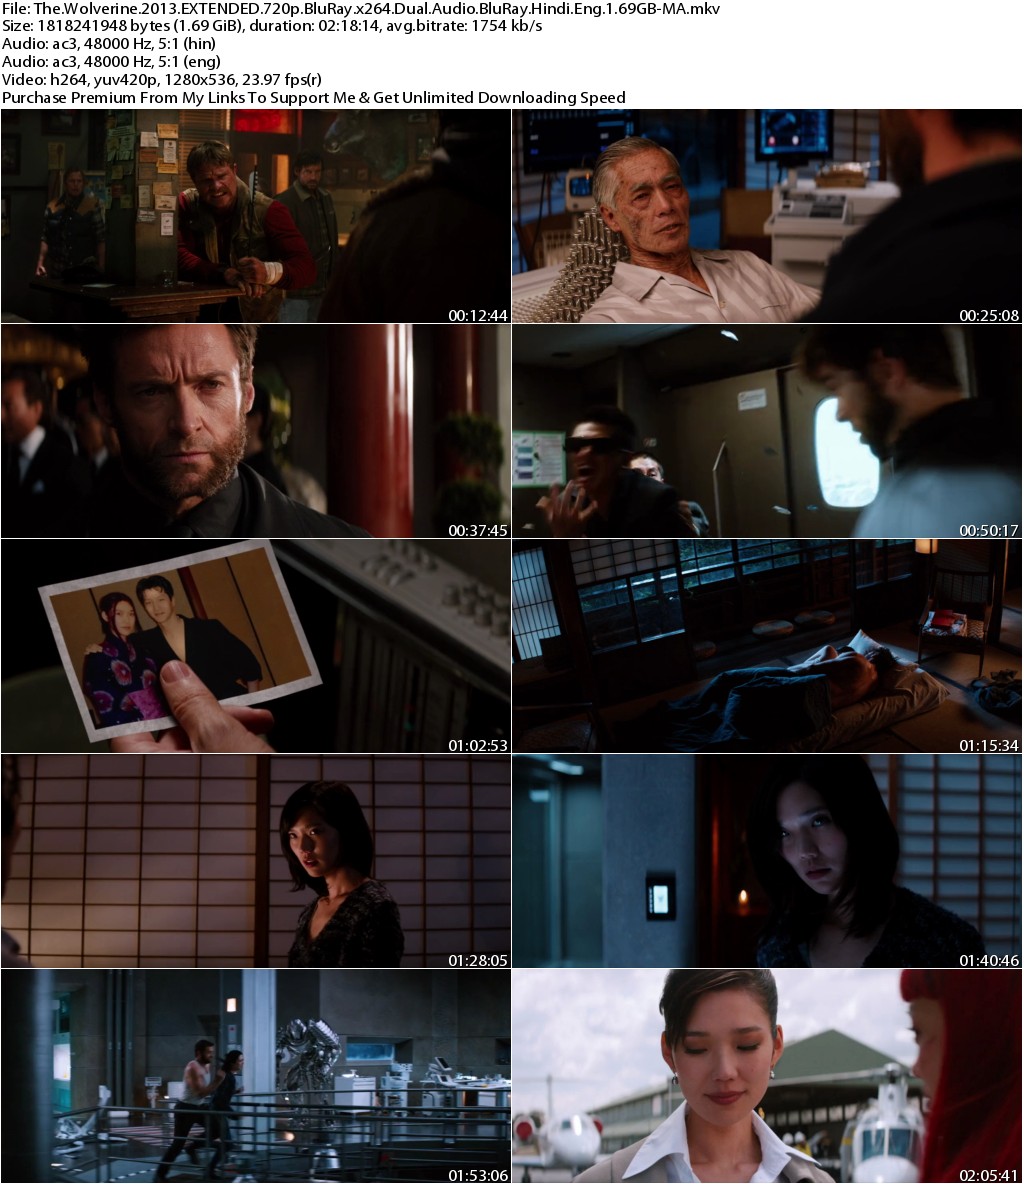 The Wolverine (2013) EXTENDED 720p BluRay x264 Dual Audio BluRay Hindi Eng 1.69GB-MA